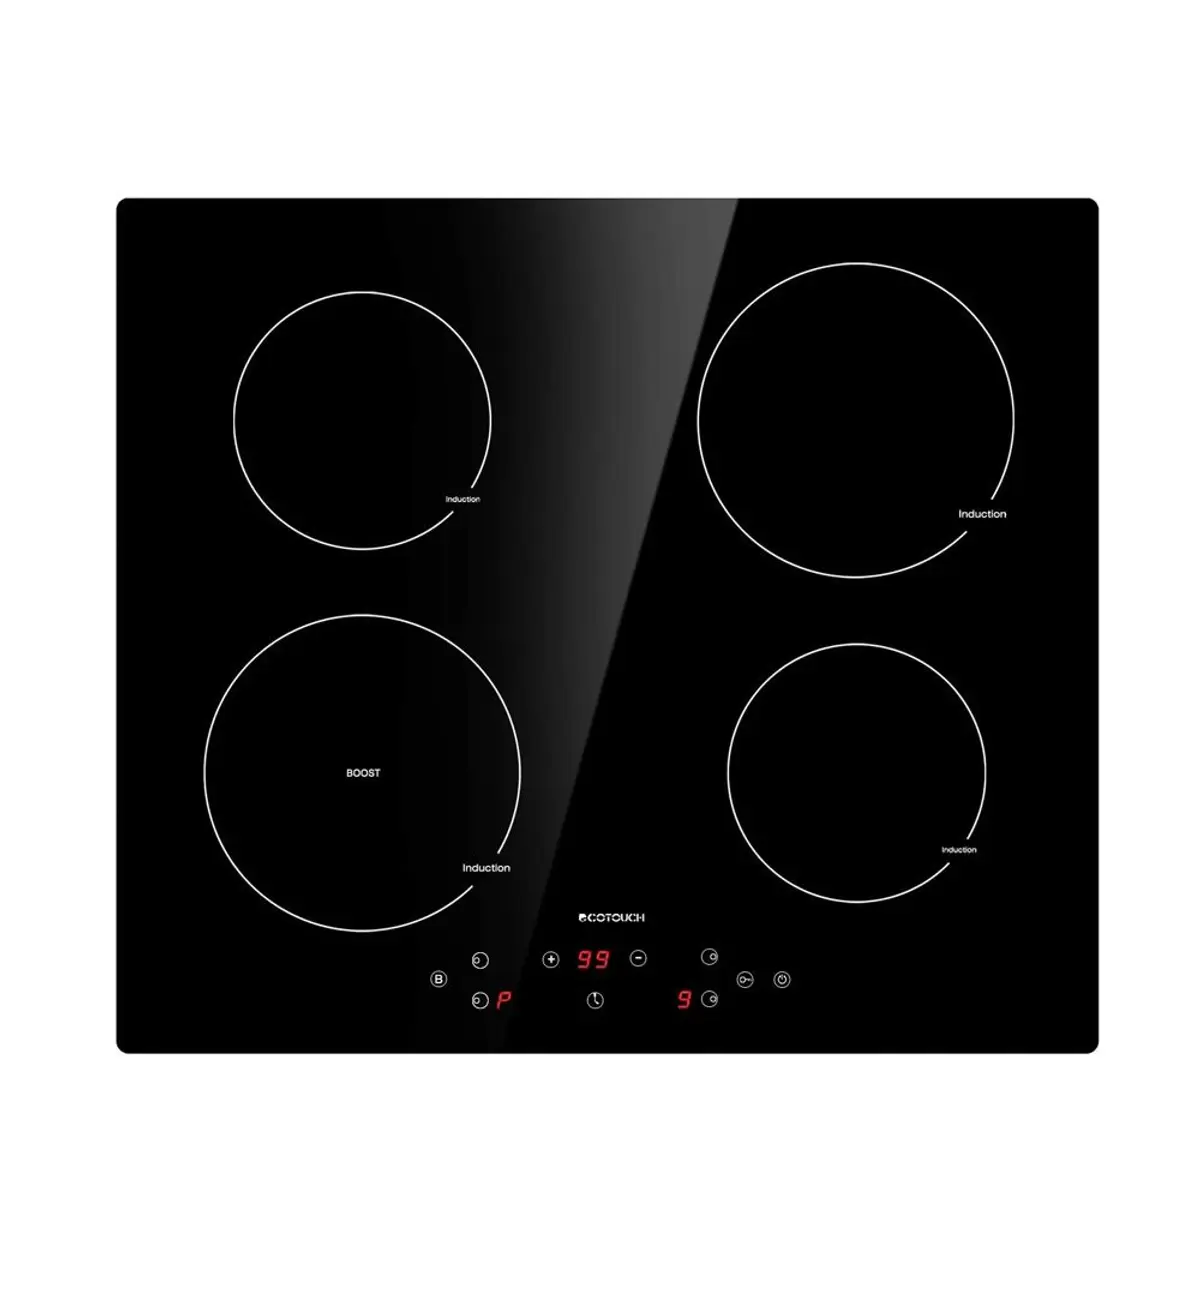 Ecotouch 24 Inch Induction Cooktop review